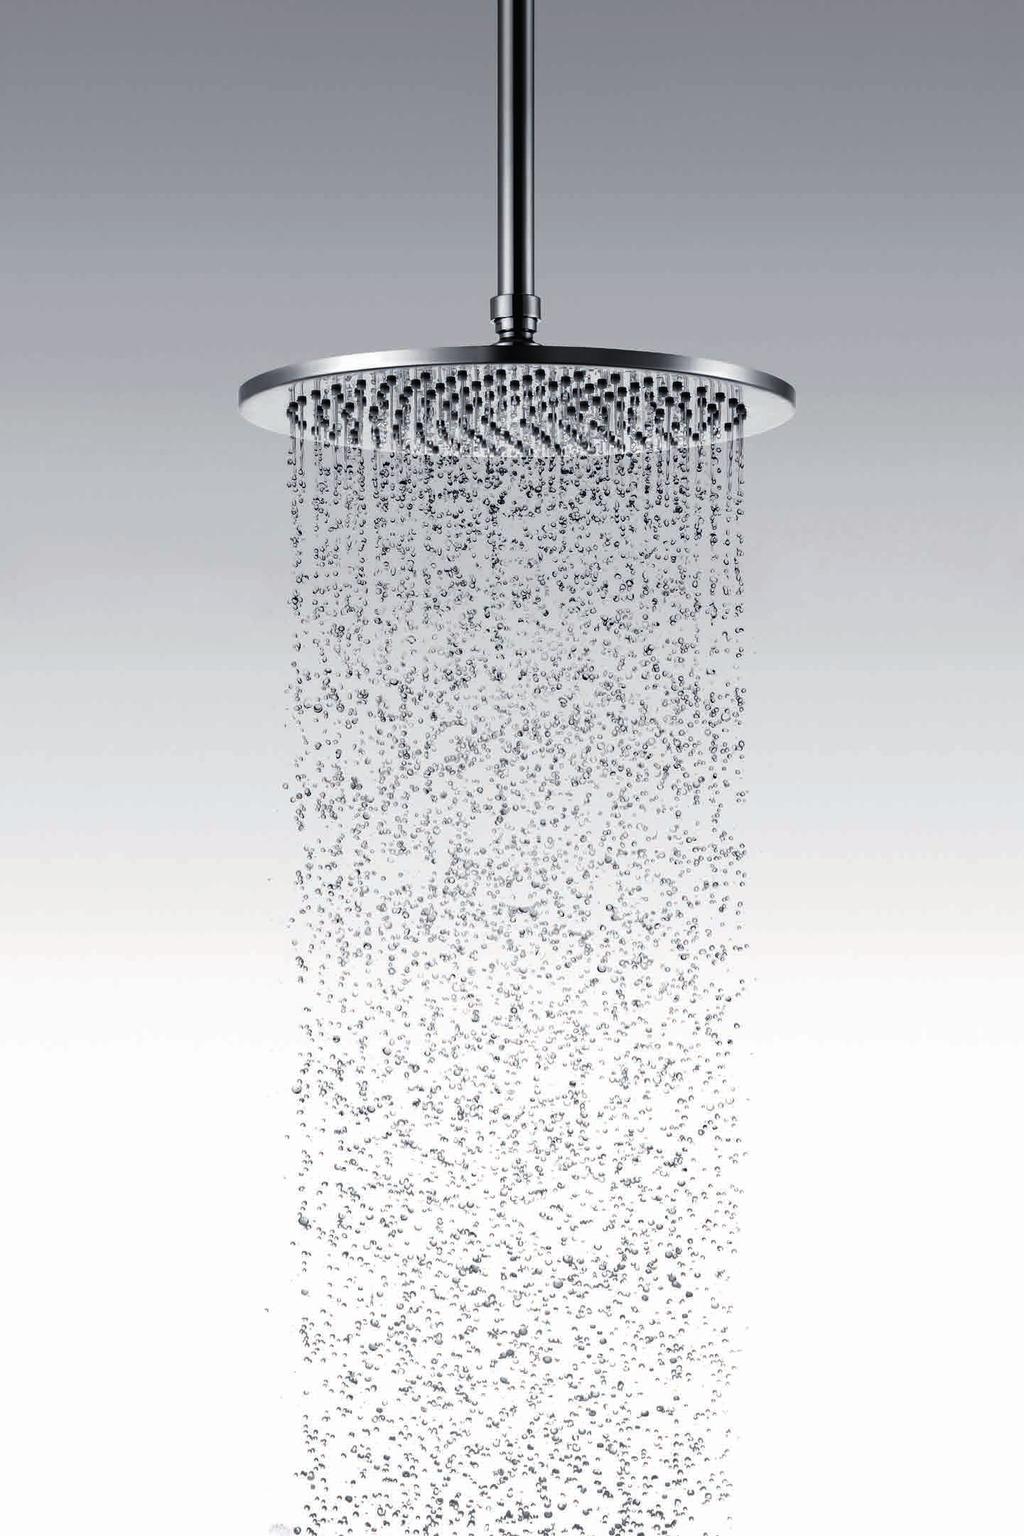 AIR-INJECTION RAINSHOWER, 20% WATER SAVING The design of